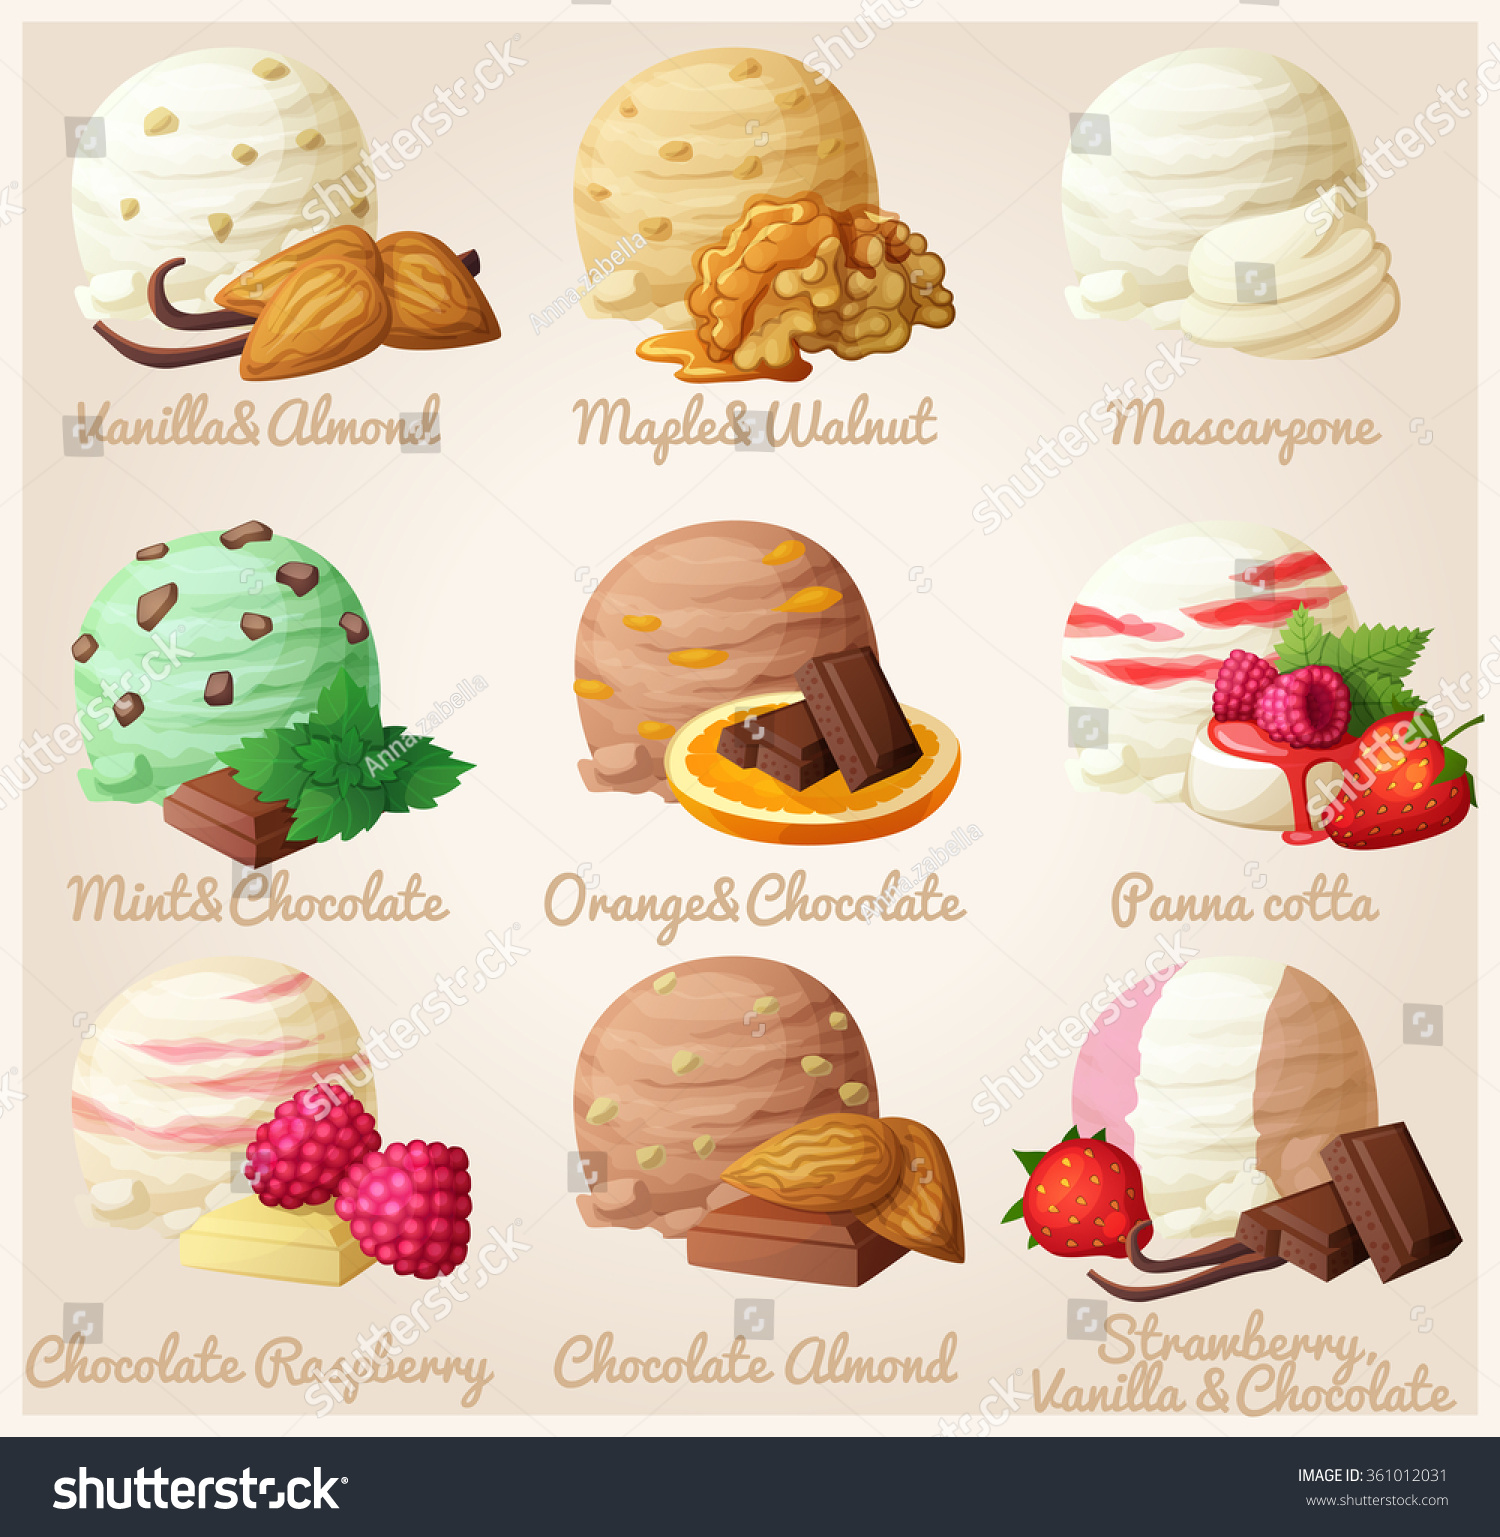 Image result for ice cream flavour